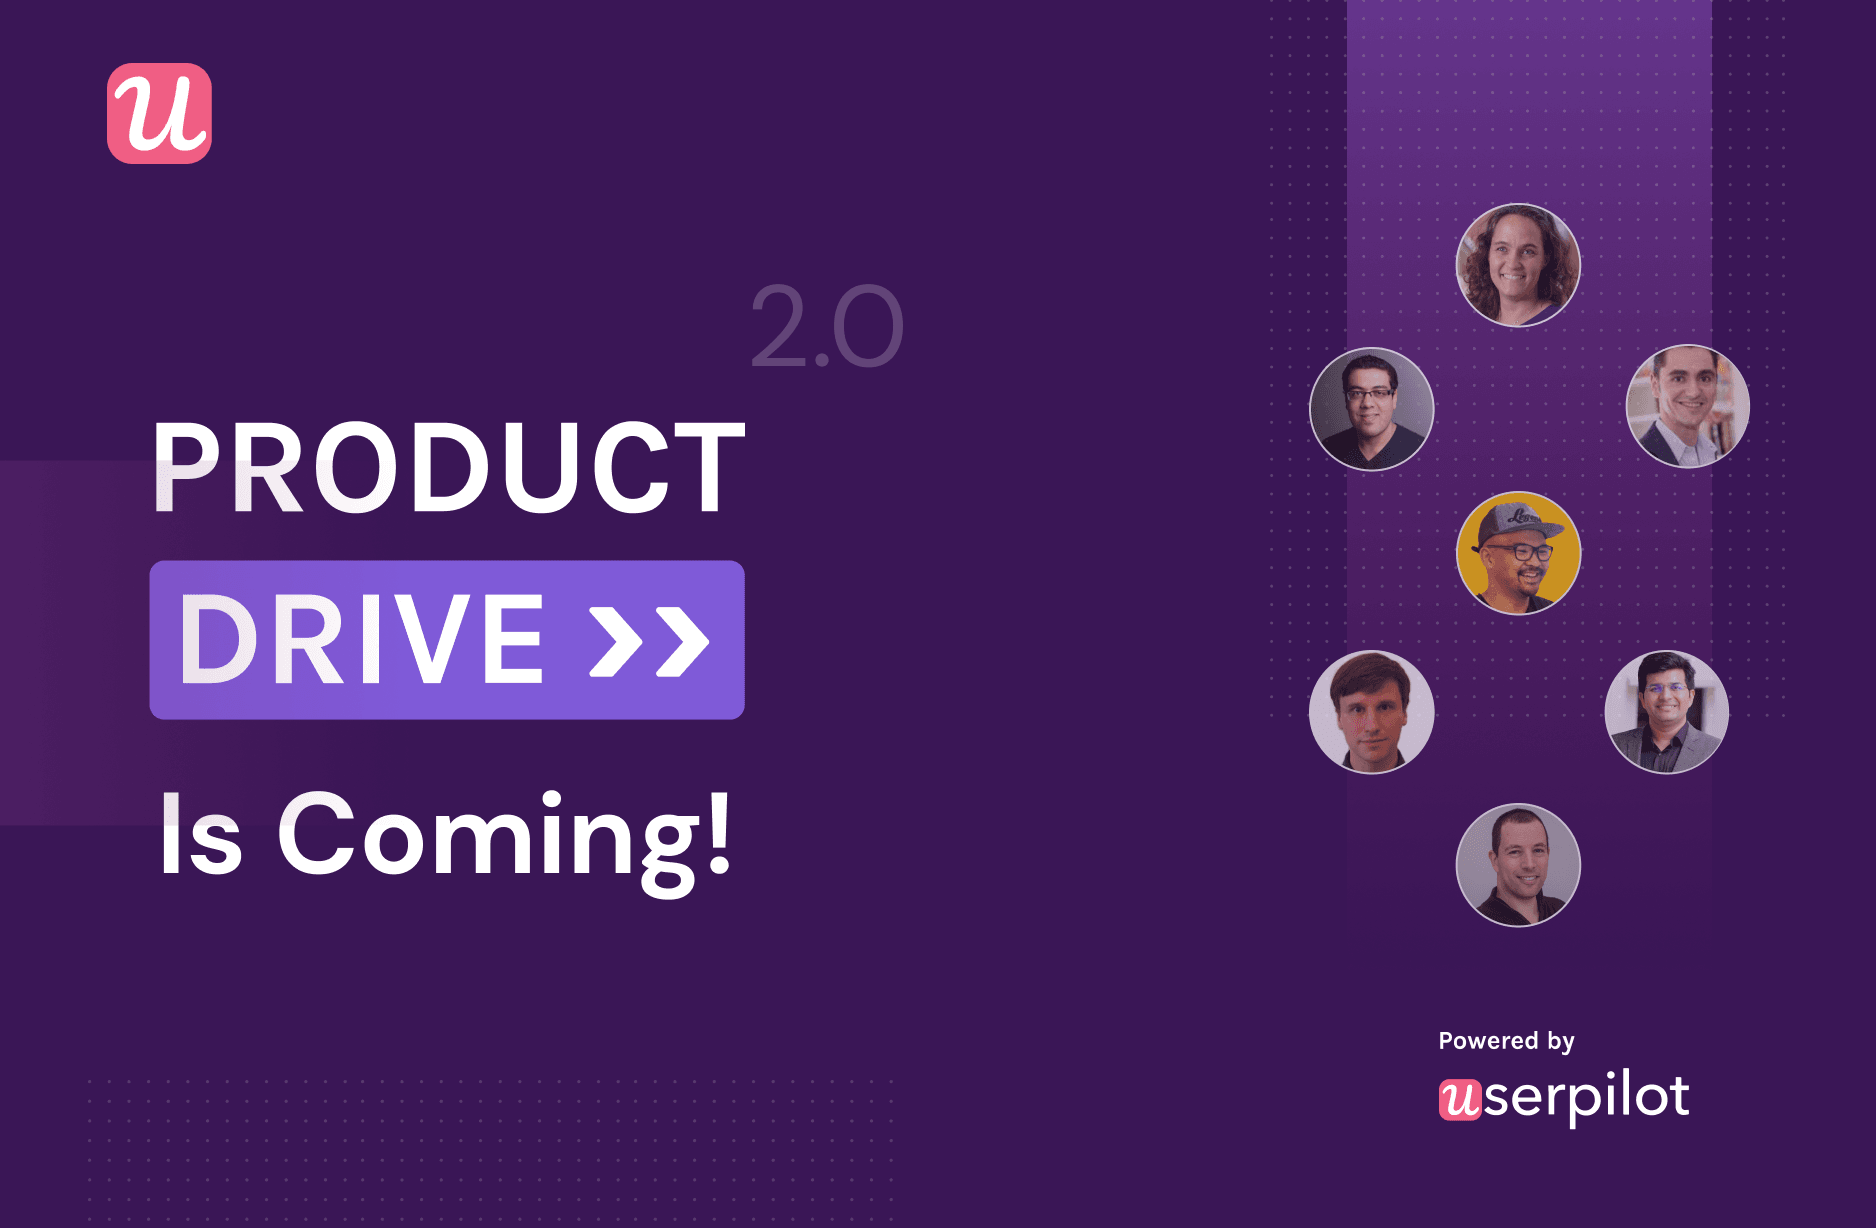 Teresa Torres, Ramli John, Carlos González de Villaumbrosia. Deep Innovation, Killing Features & the Challenges in Product in 2021. Product Drive 2.0 is coming!